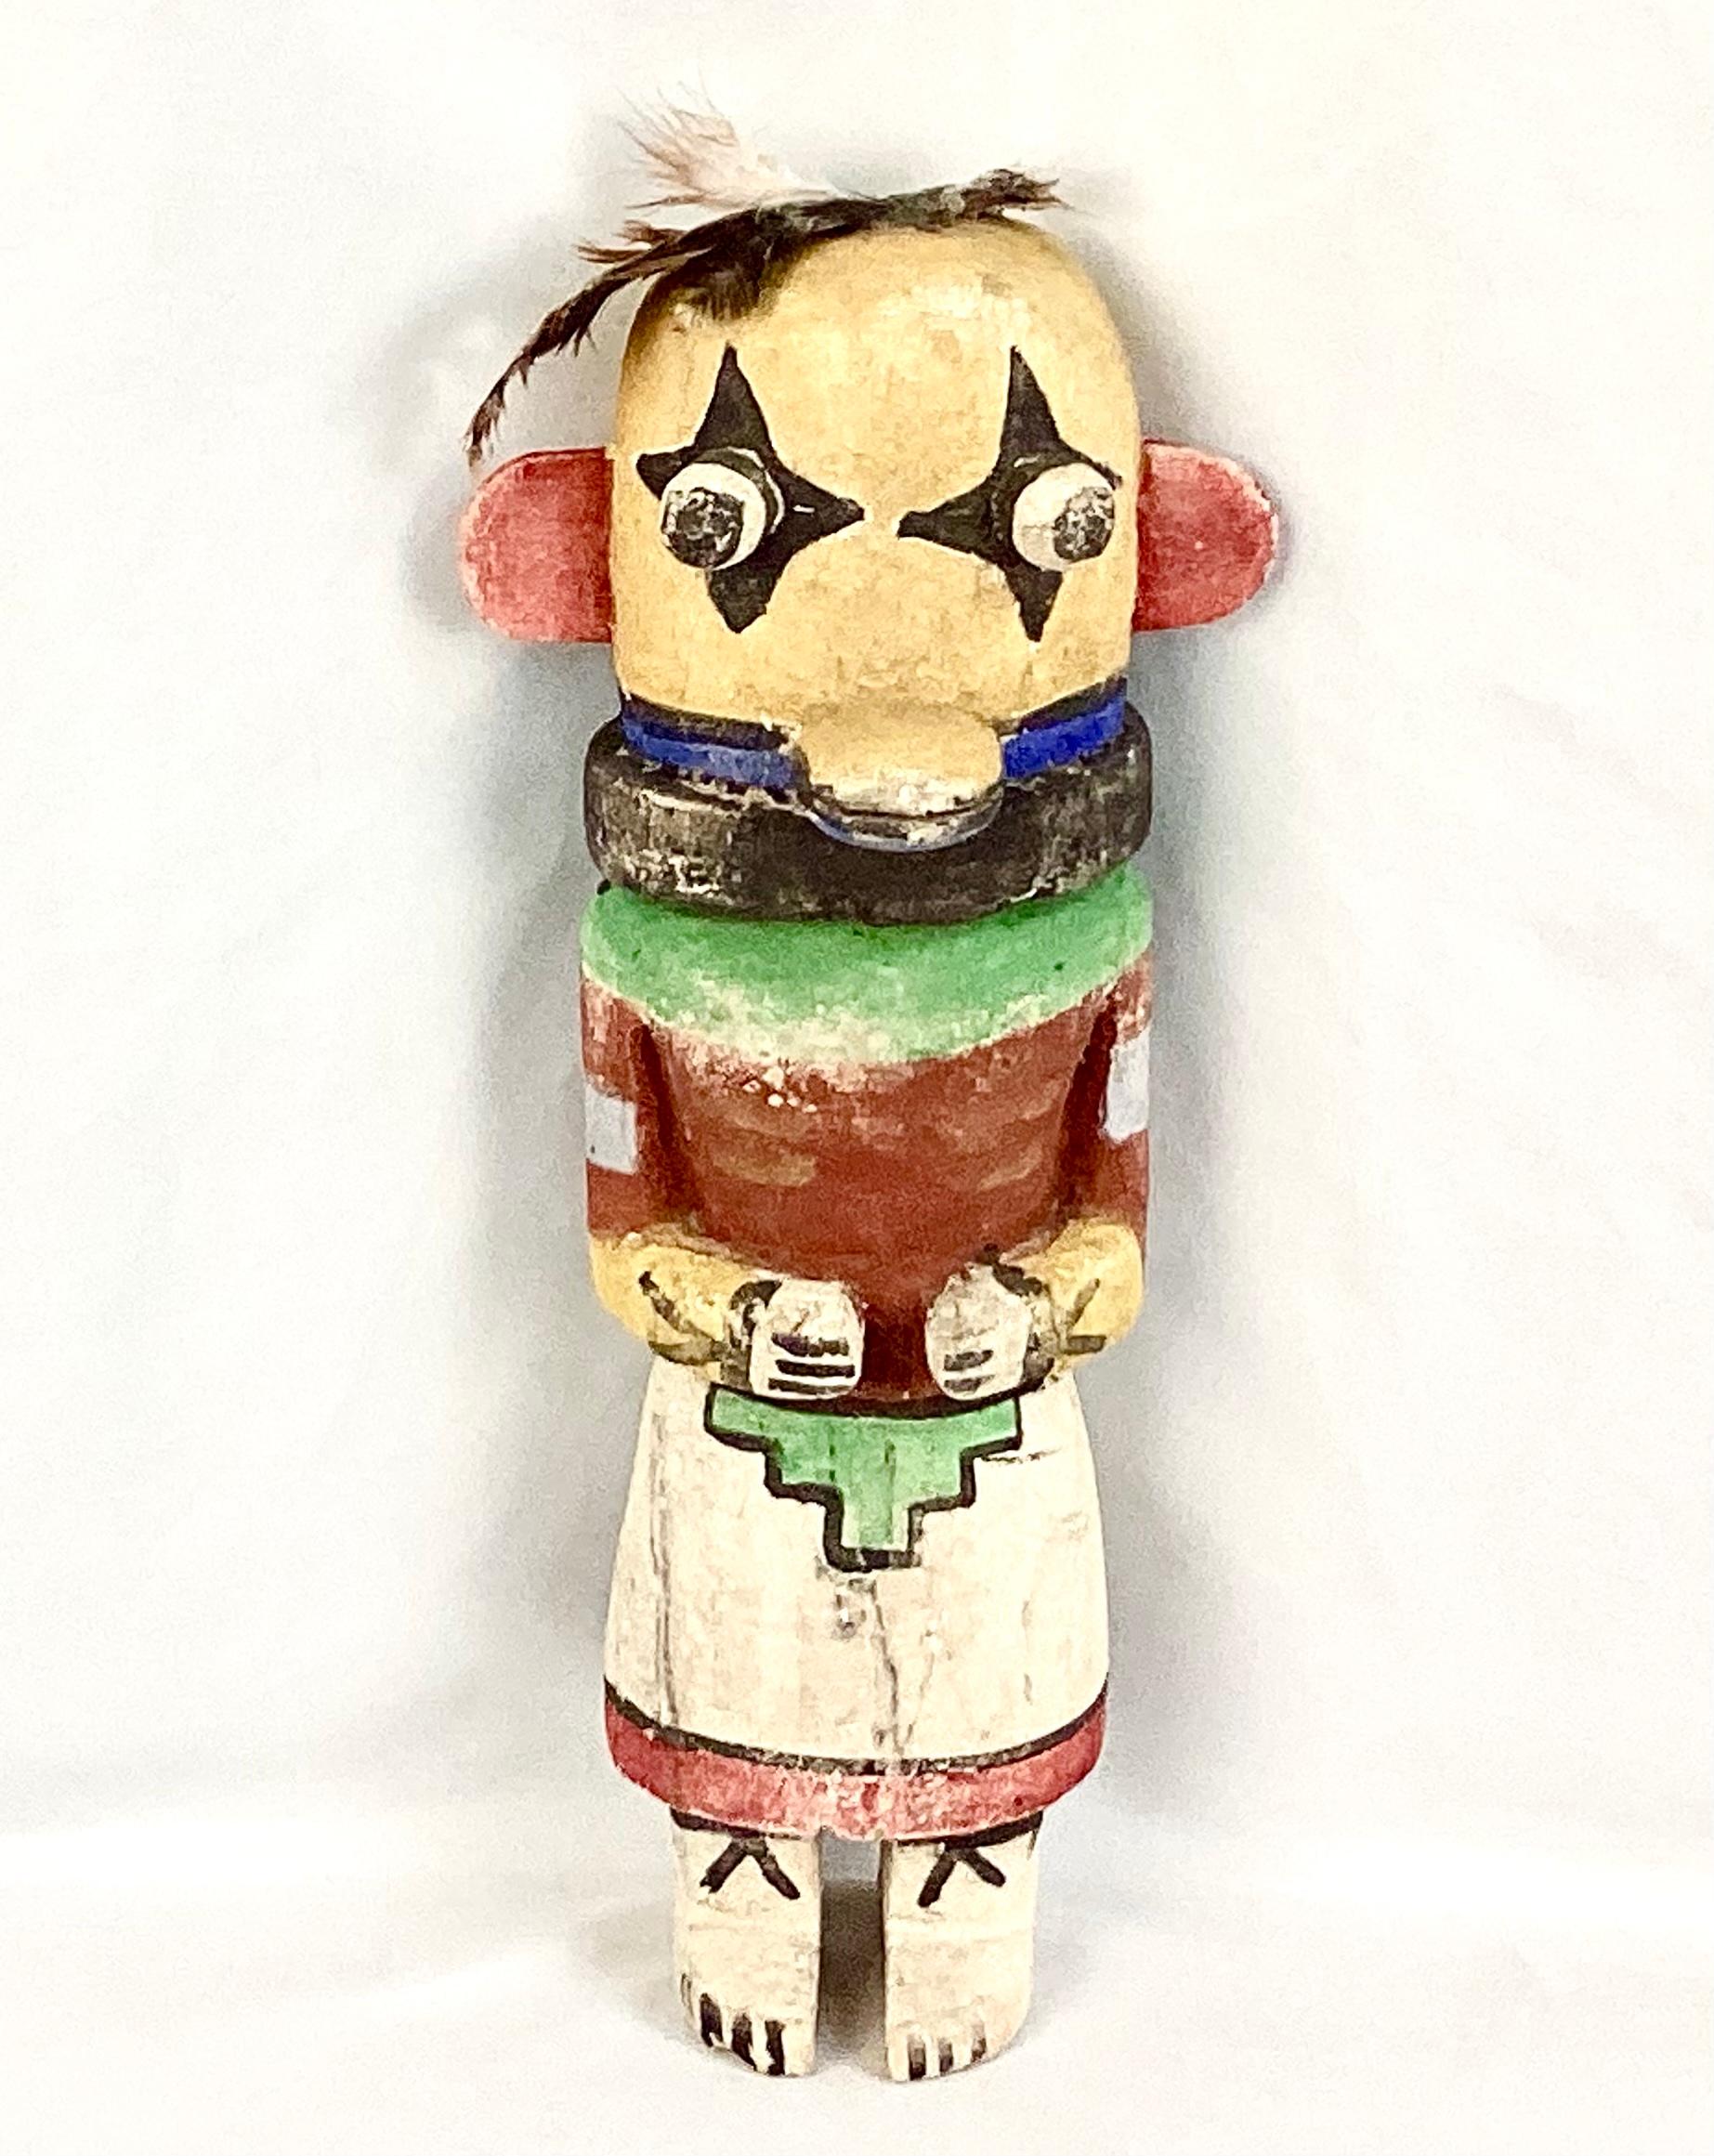 Hopi katsina figures (Hopi language: tithu or katsintithu), also known as kachina dolls, are figures carved, typically from cottonwood root, by Hopi people to instruct young girls and new brides about katsinas or katsinam, the immortal beings that